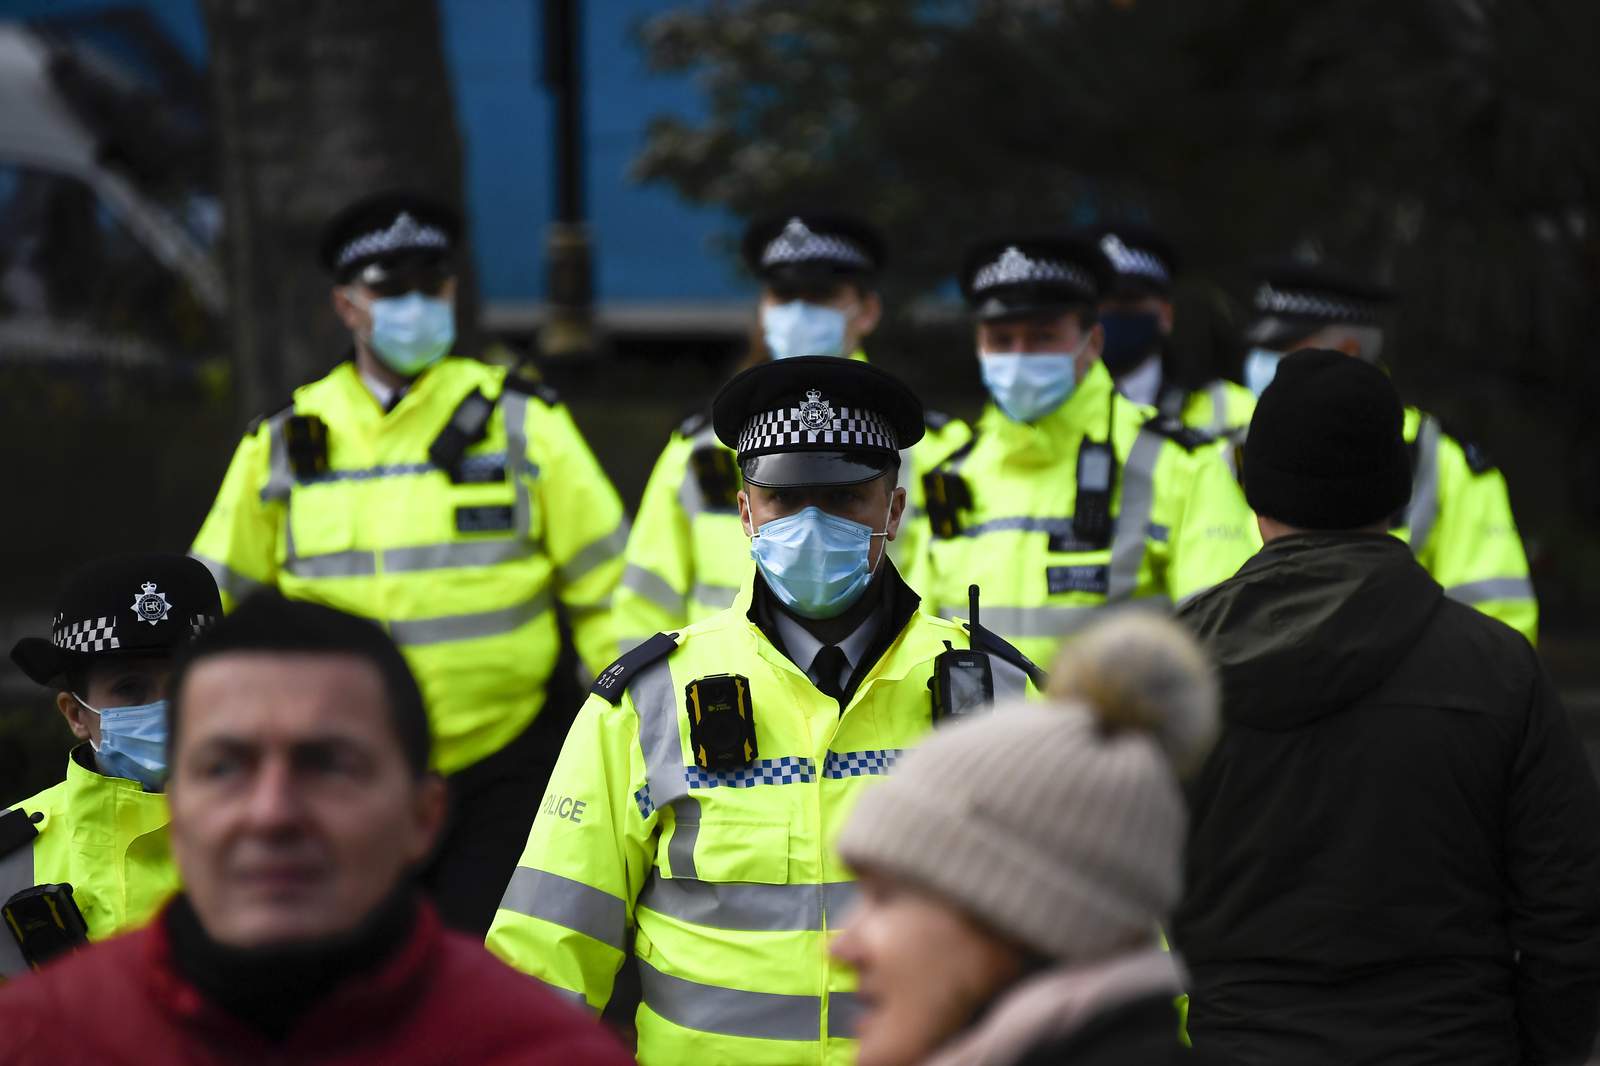 London faces tightest restrictions; sees new virus variant